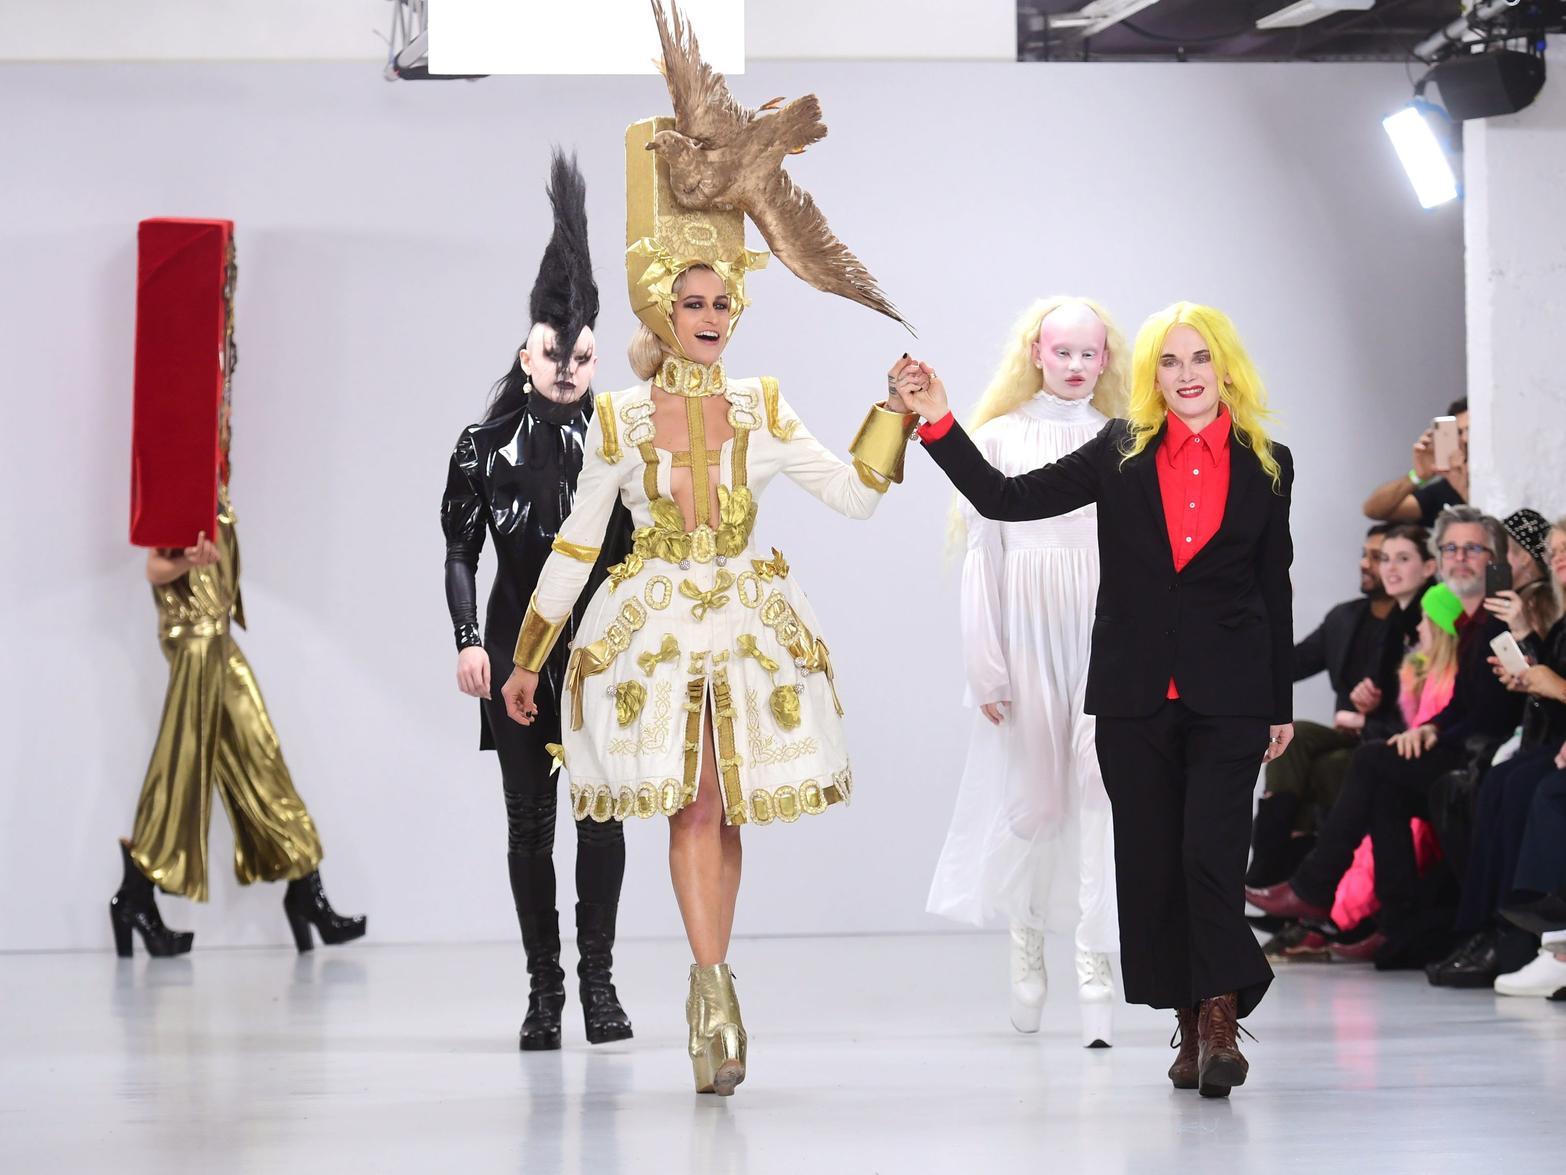 Alice Dellal, Pam Hogg and Models on the catwalk during the Pam Hogg show at London Fashion Week February 2020. Ian West/PA Wire